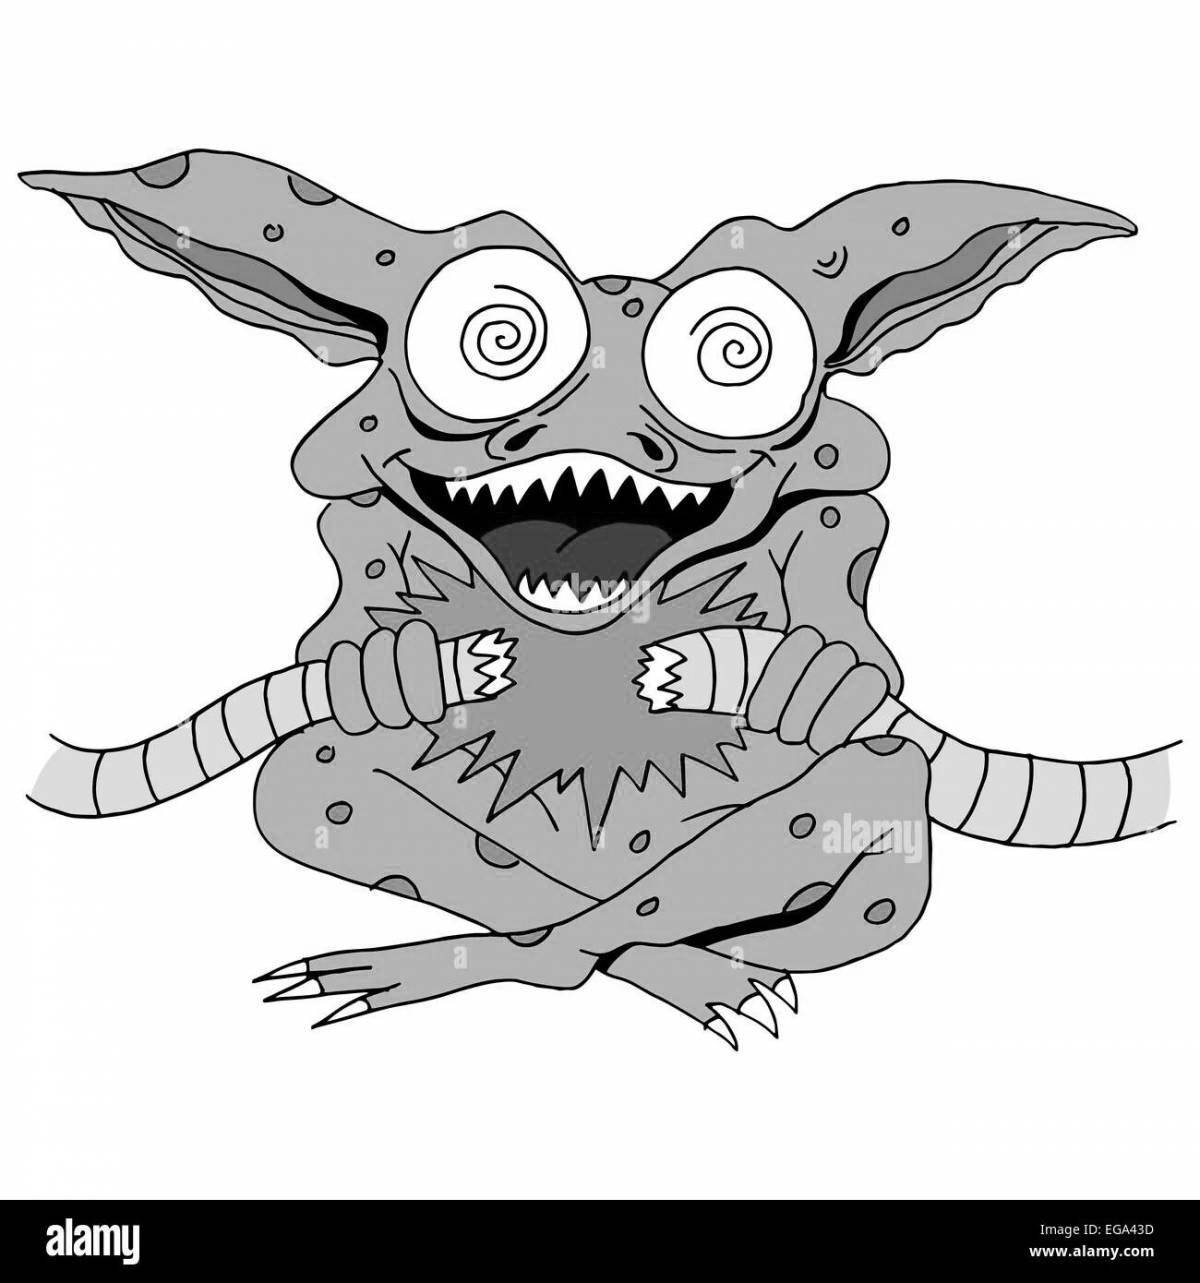 Coloring gremlins with imagination